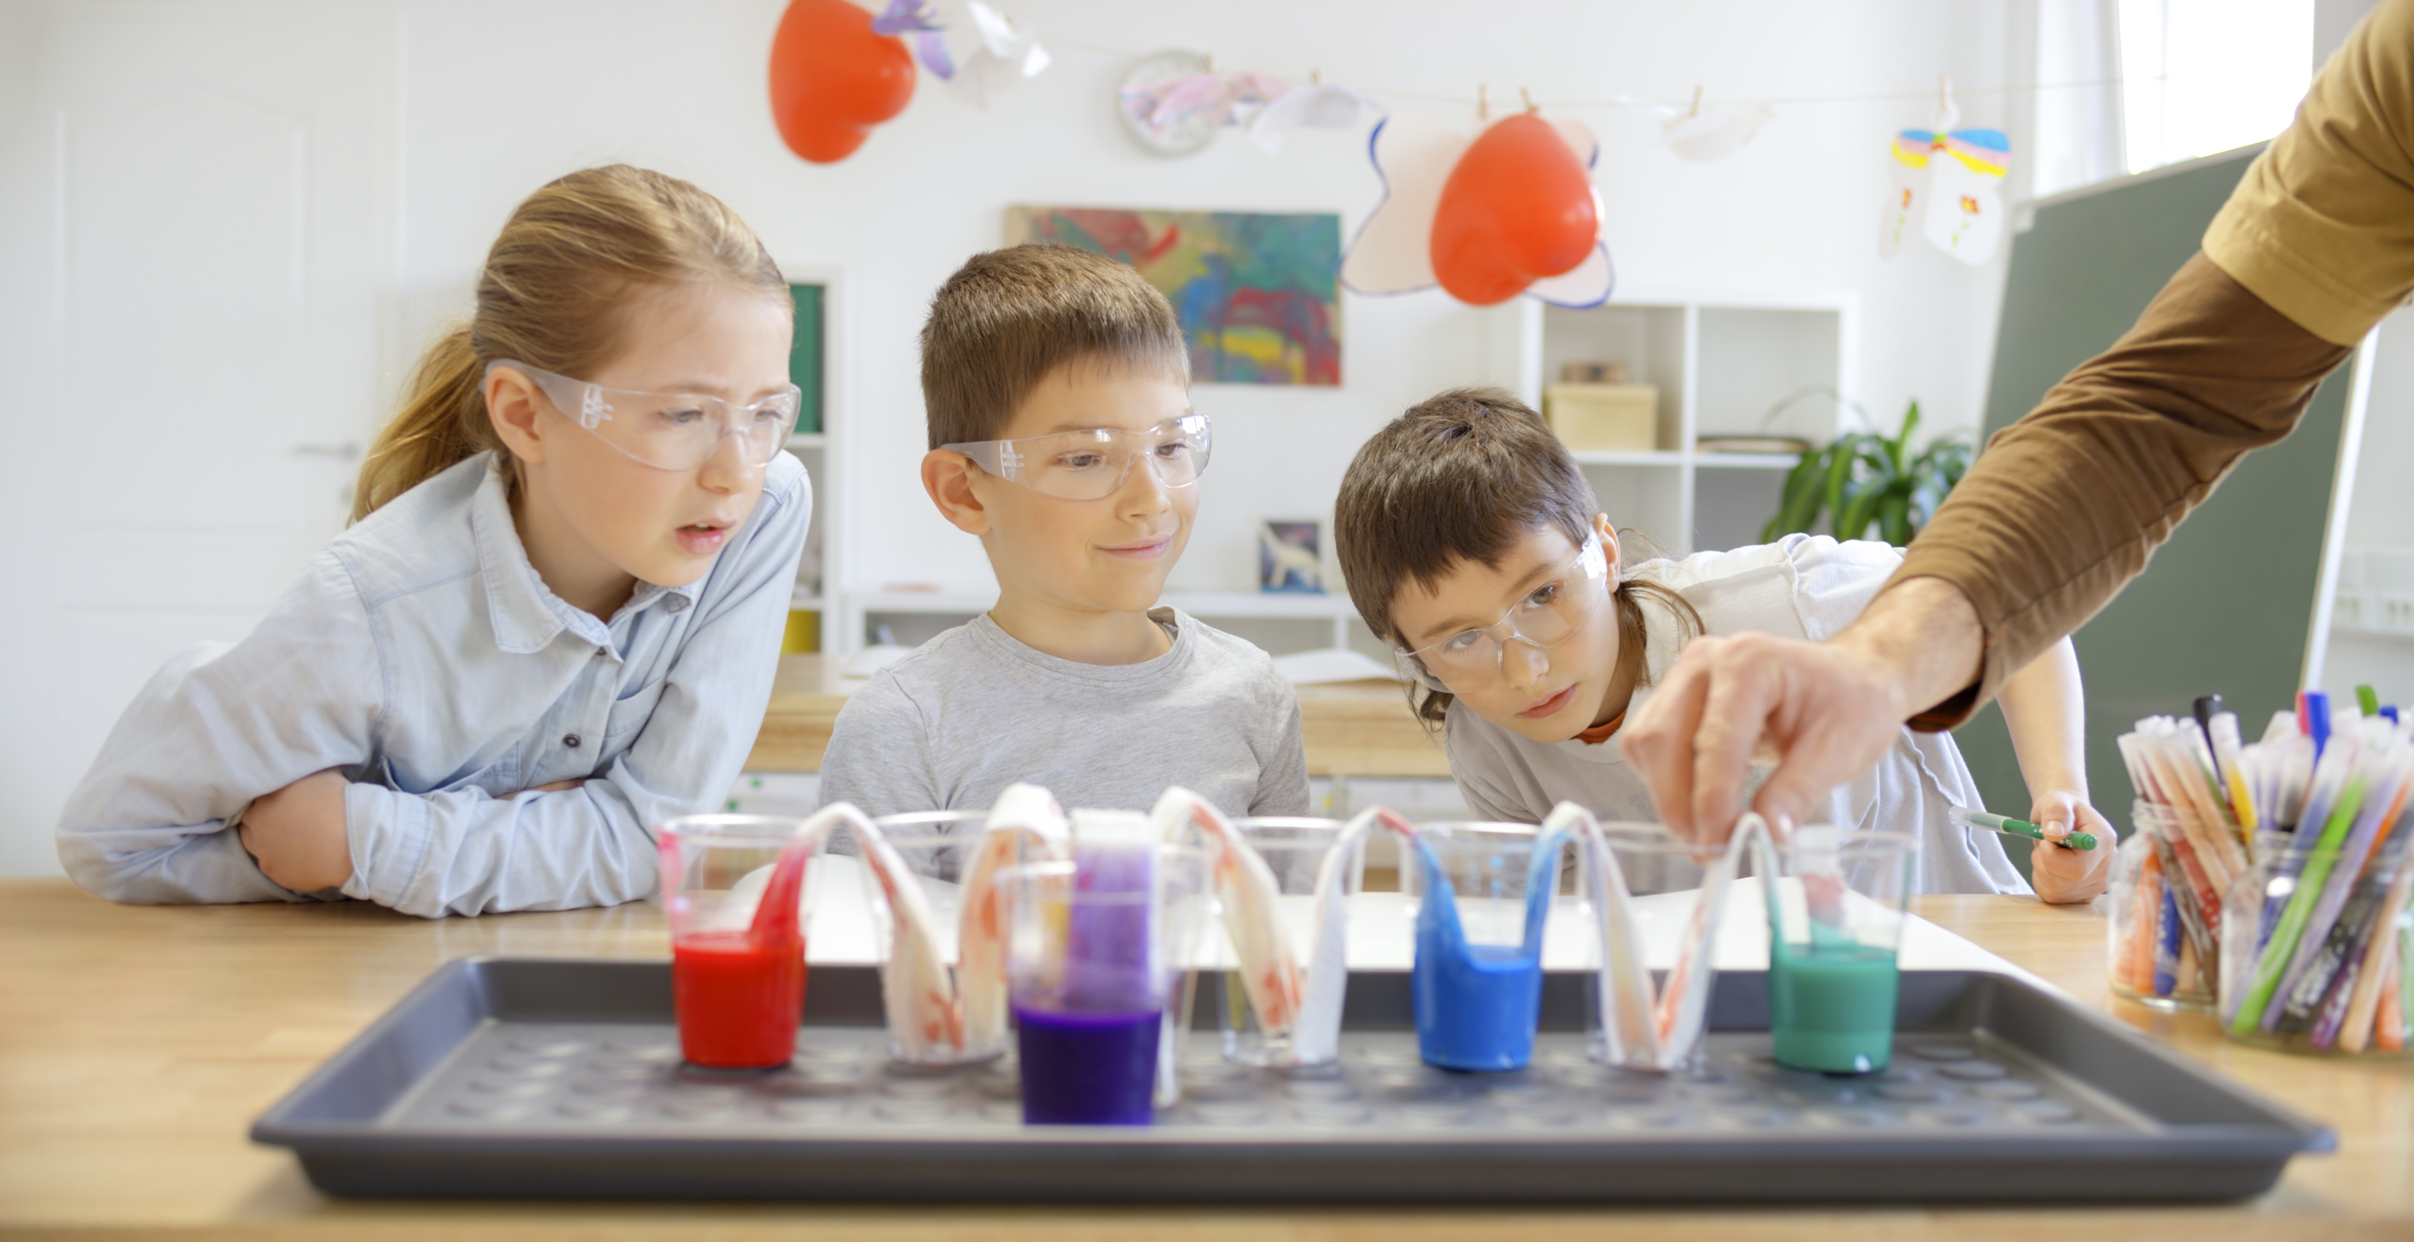 Group of children doing a science project